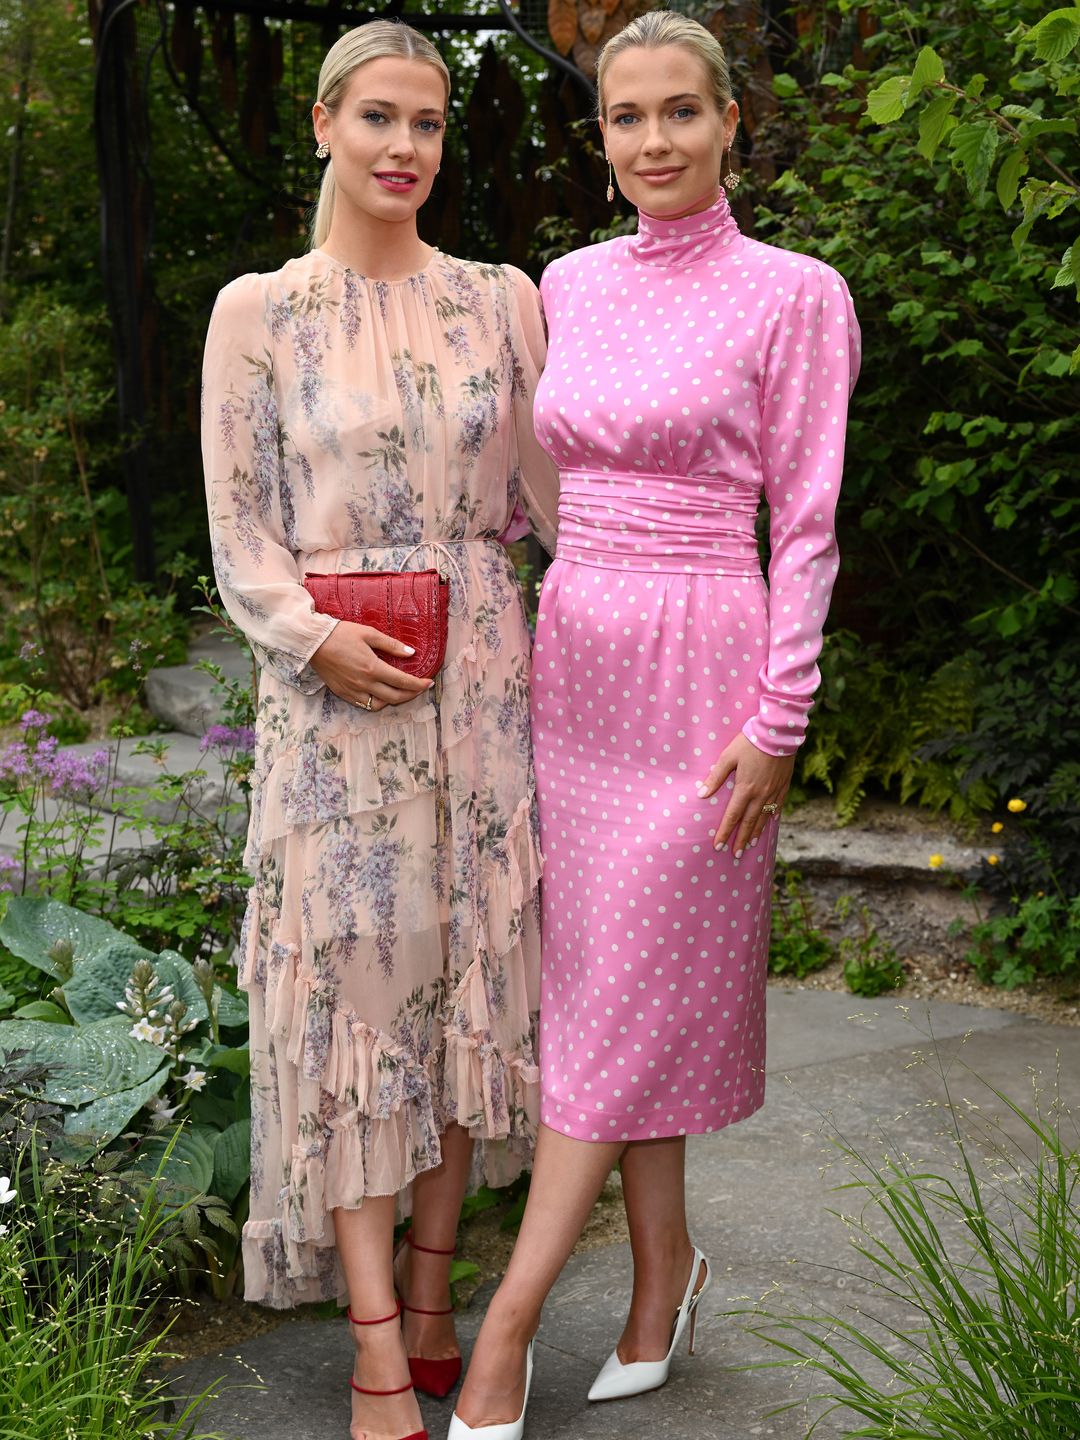 Lady Amelia and Eliza Spencer wearing printed dresses at the Chelsea Flower Show 